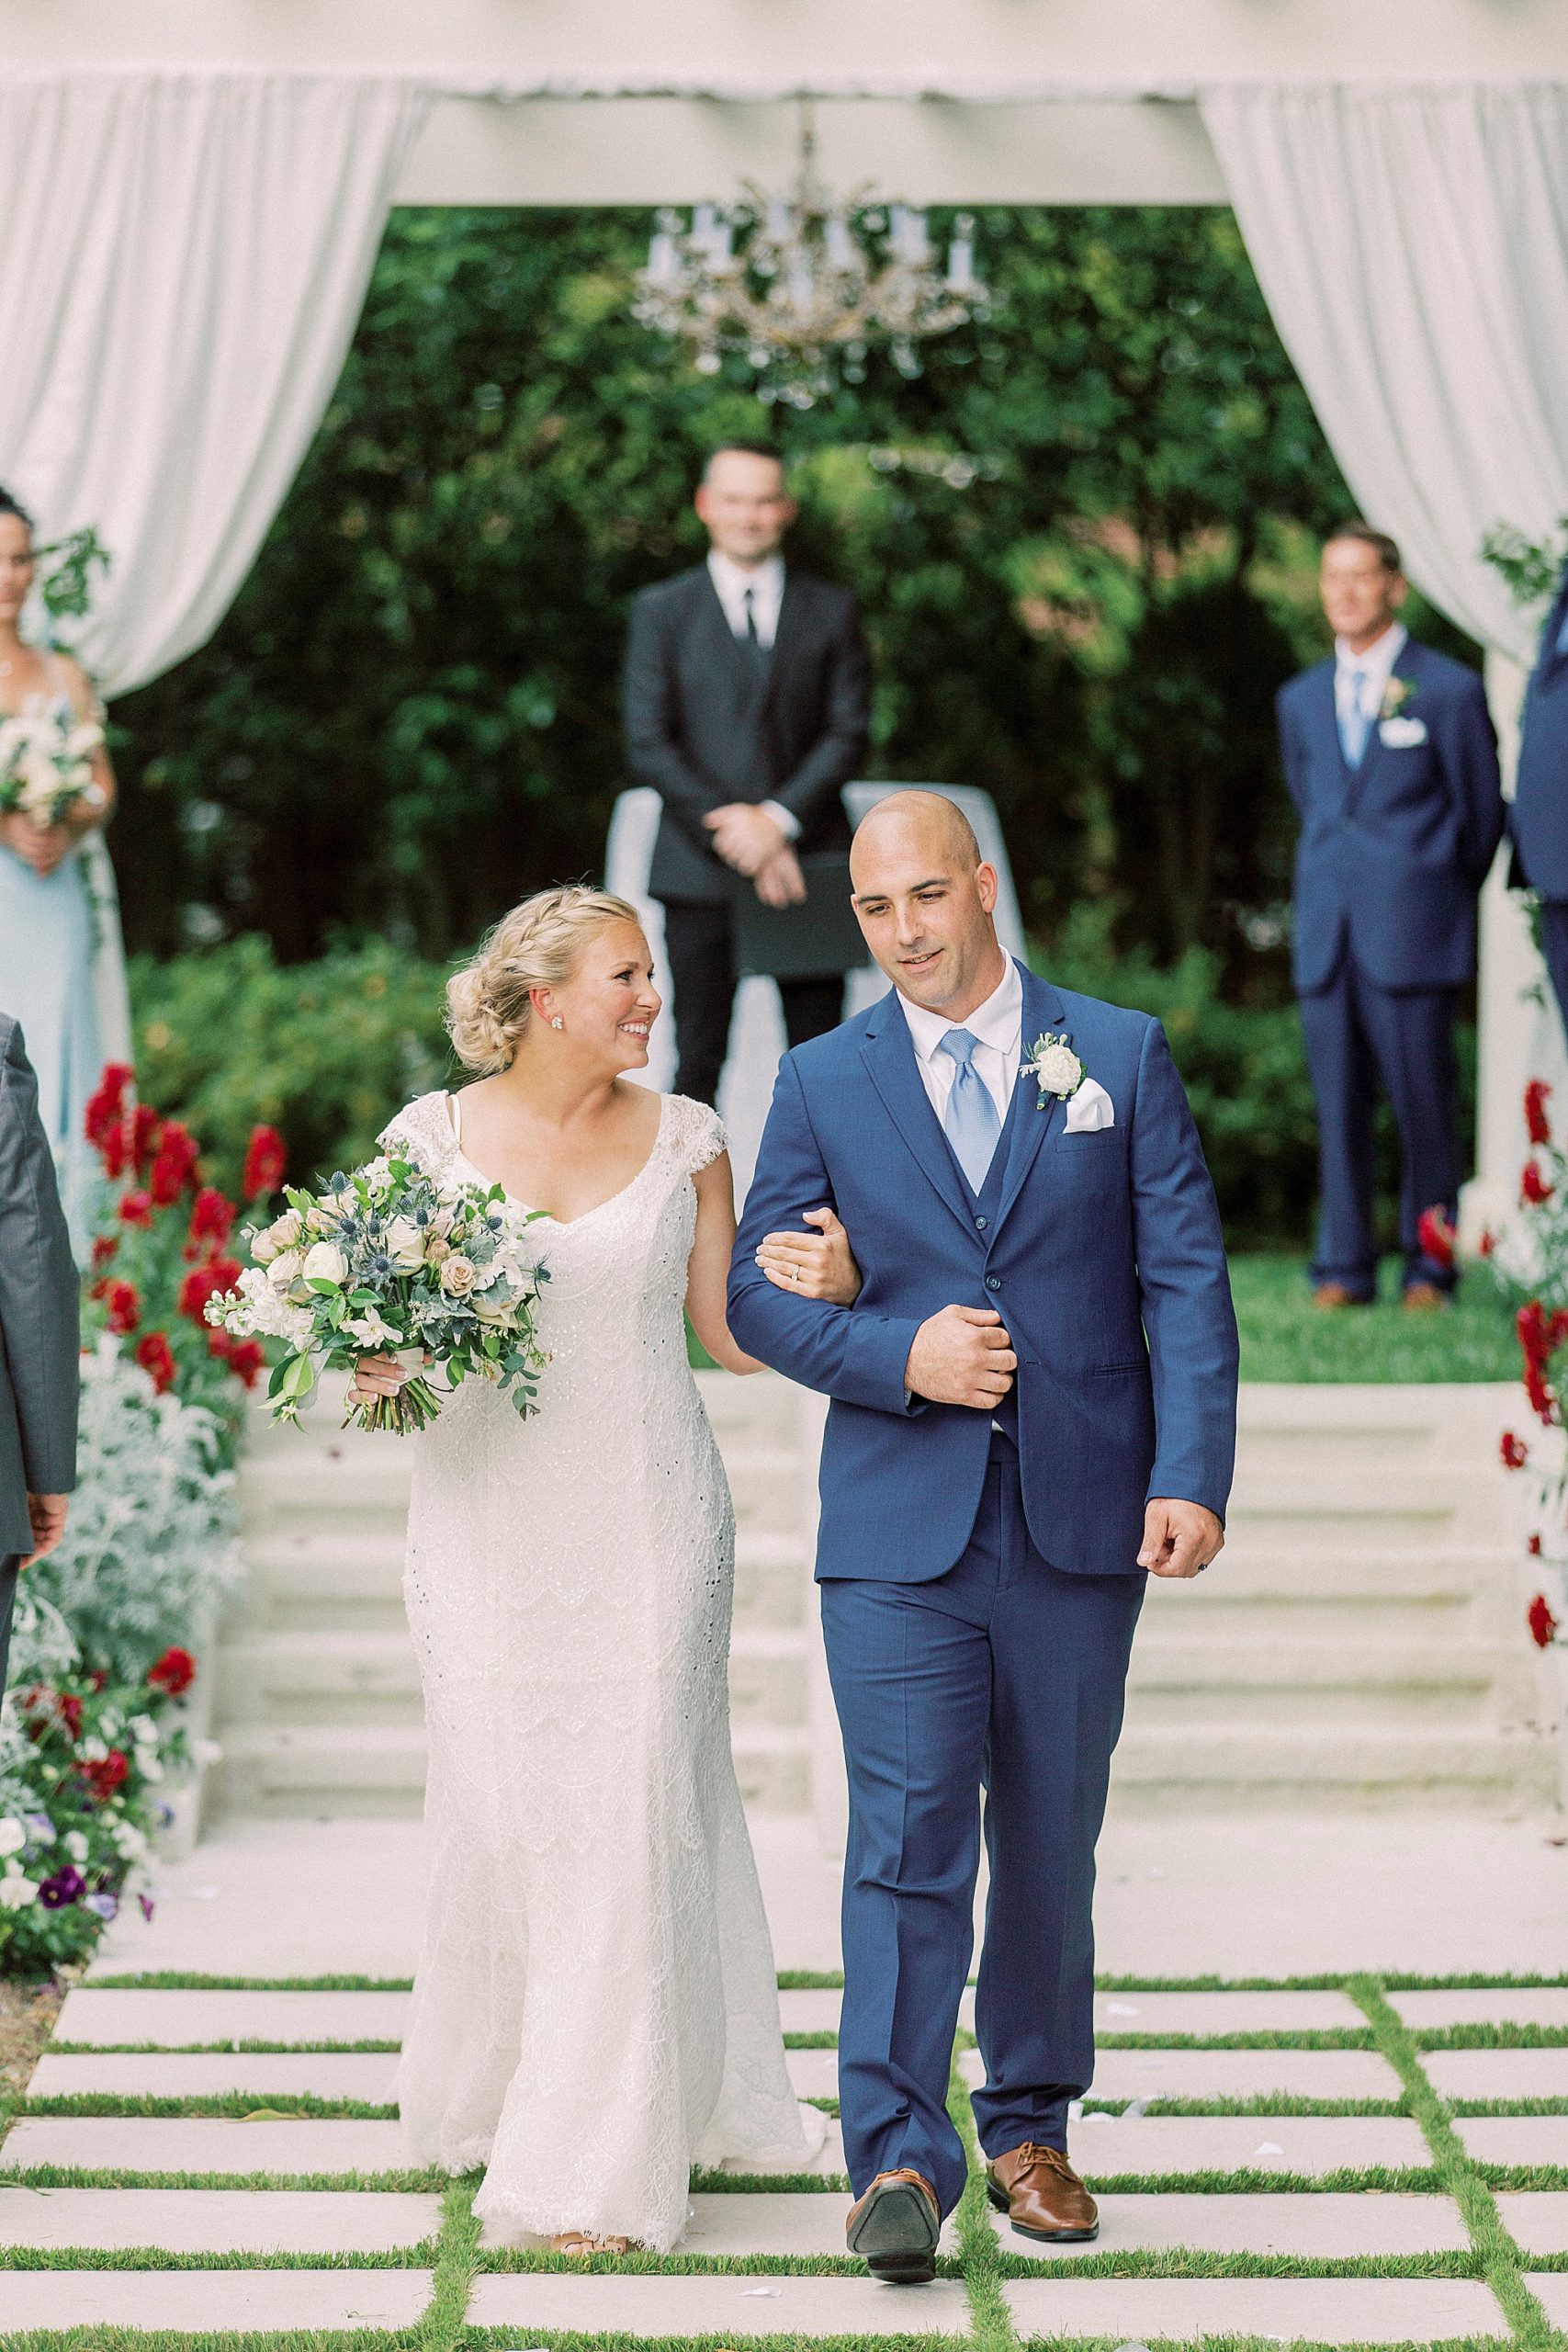 newlyweds walk up aisle after wedding ceremony at Separk Mansion